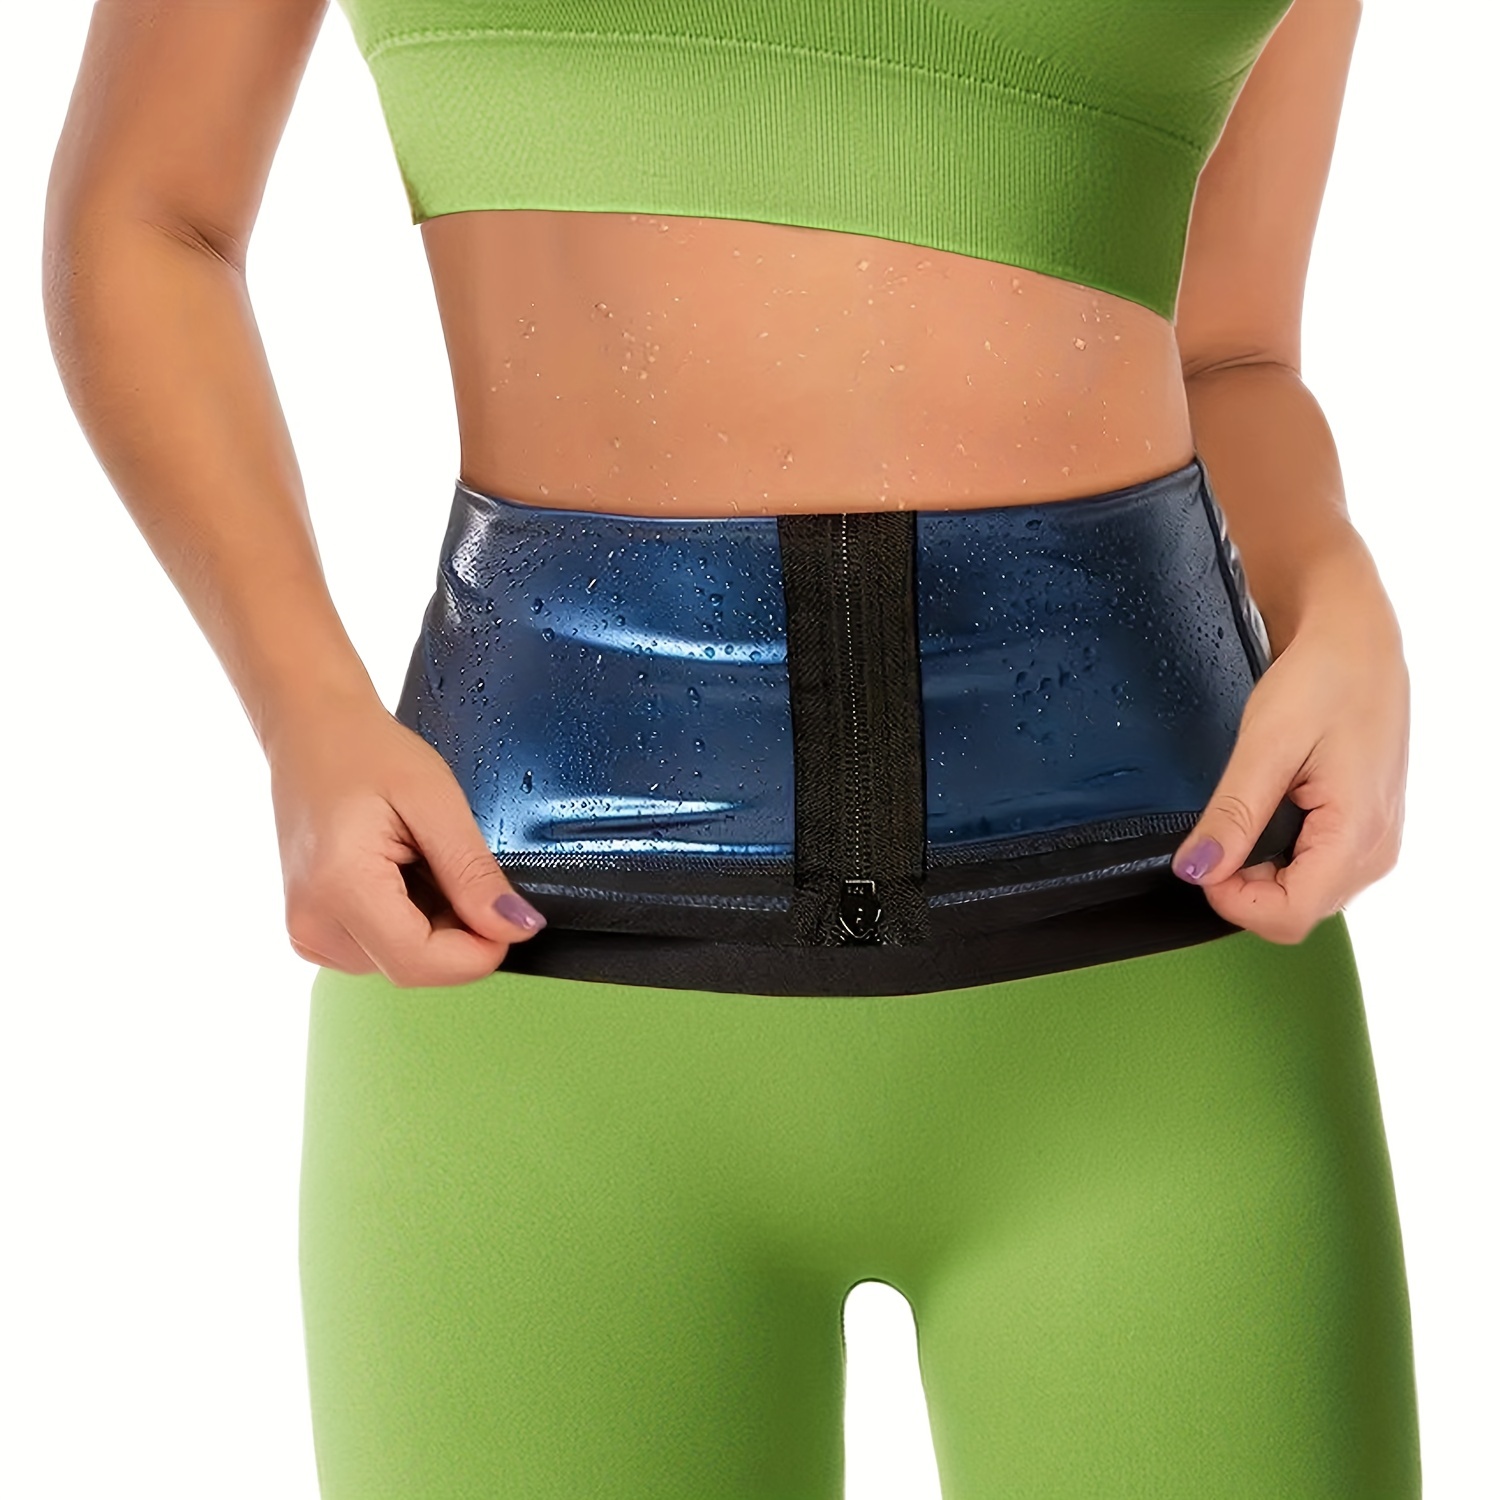 Sweat Waist Trainer for Women - Lower Belly Fat Burner, Size Up Recommended  - Corset Waist Cincher for Workout, Sport Girdle Body Shaper